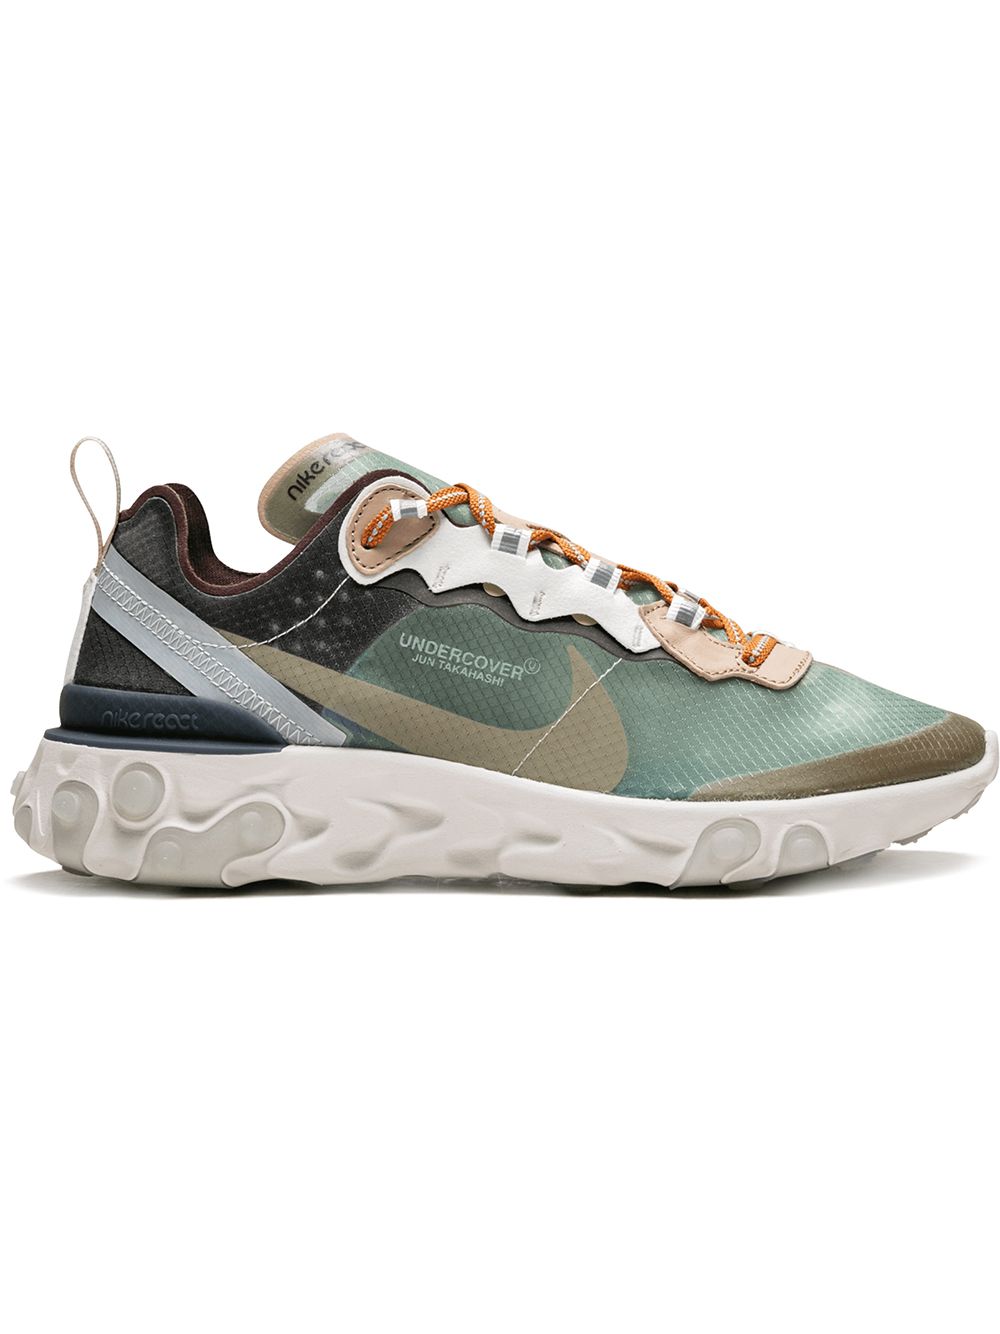 Nike x Undercover React Element 87 "Green Mist" sneakers von Nike